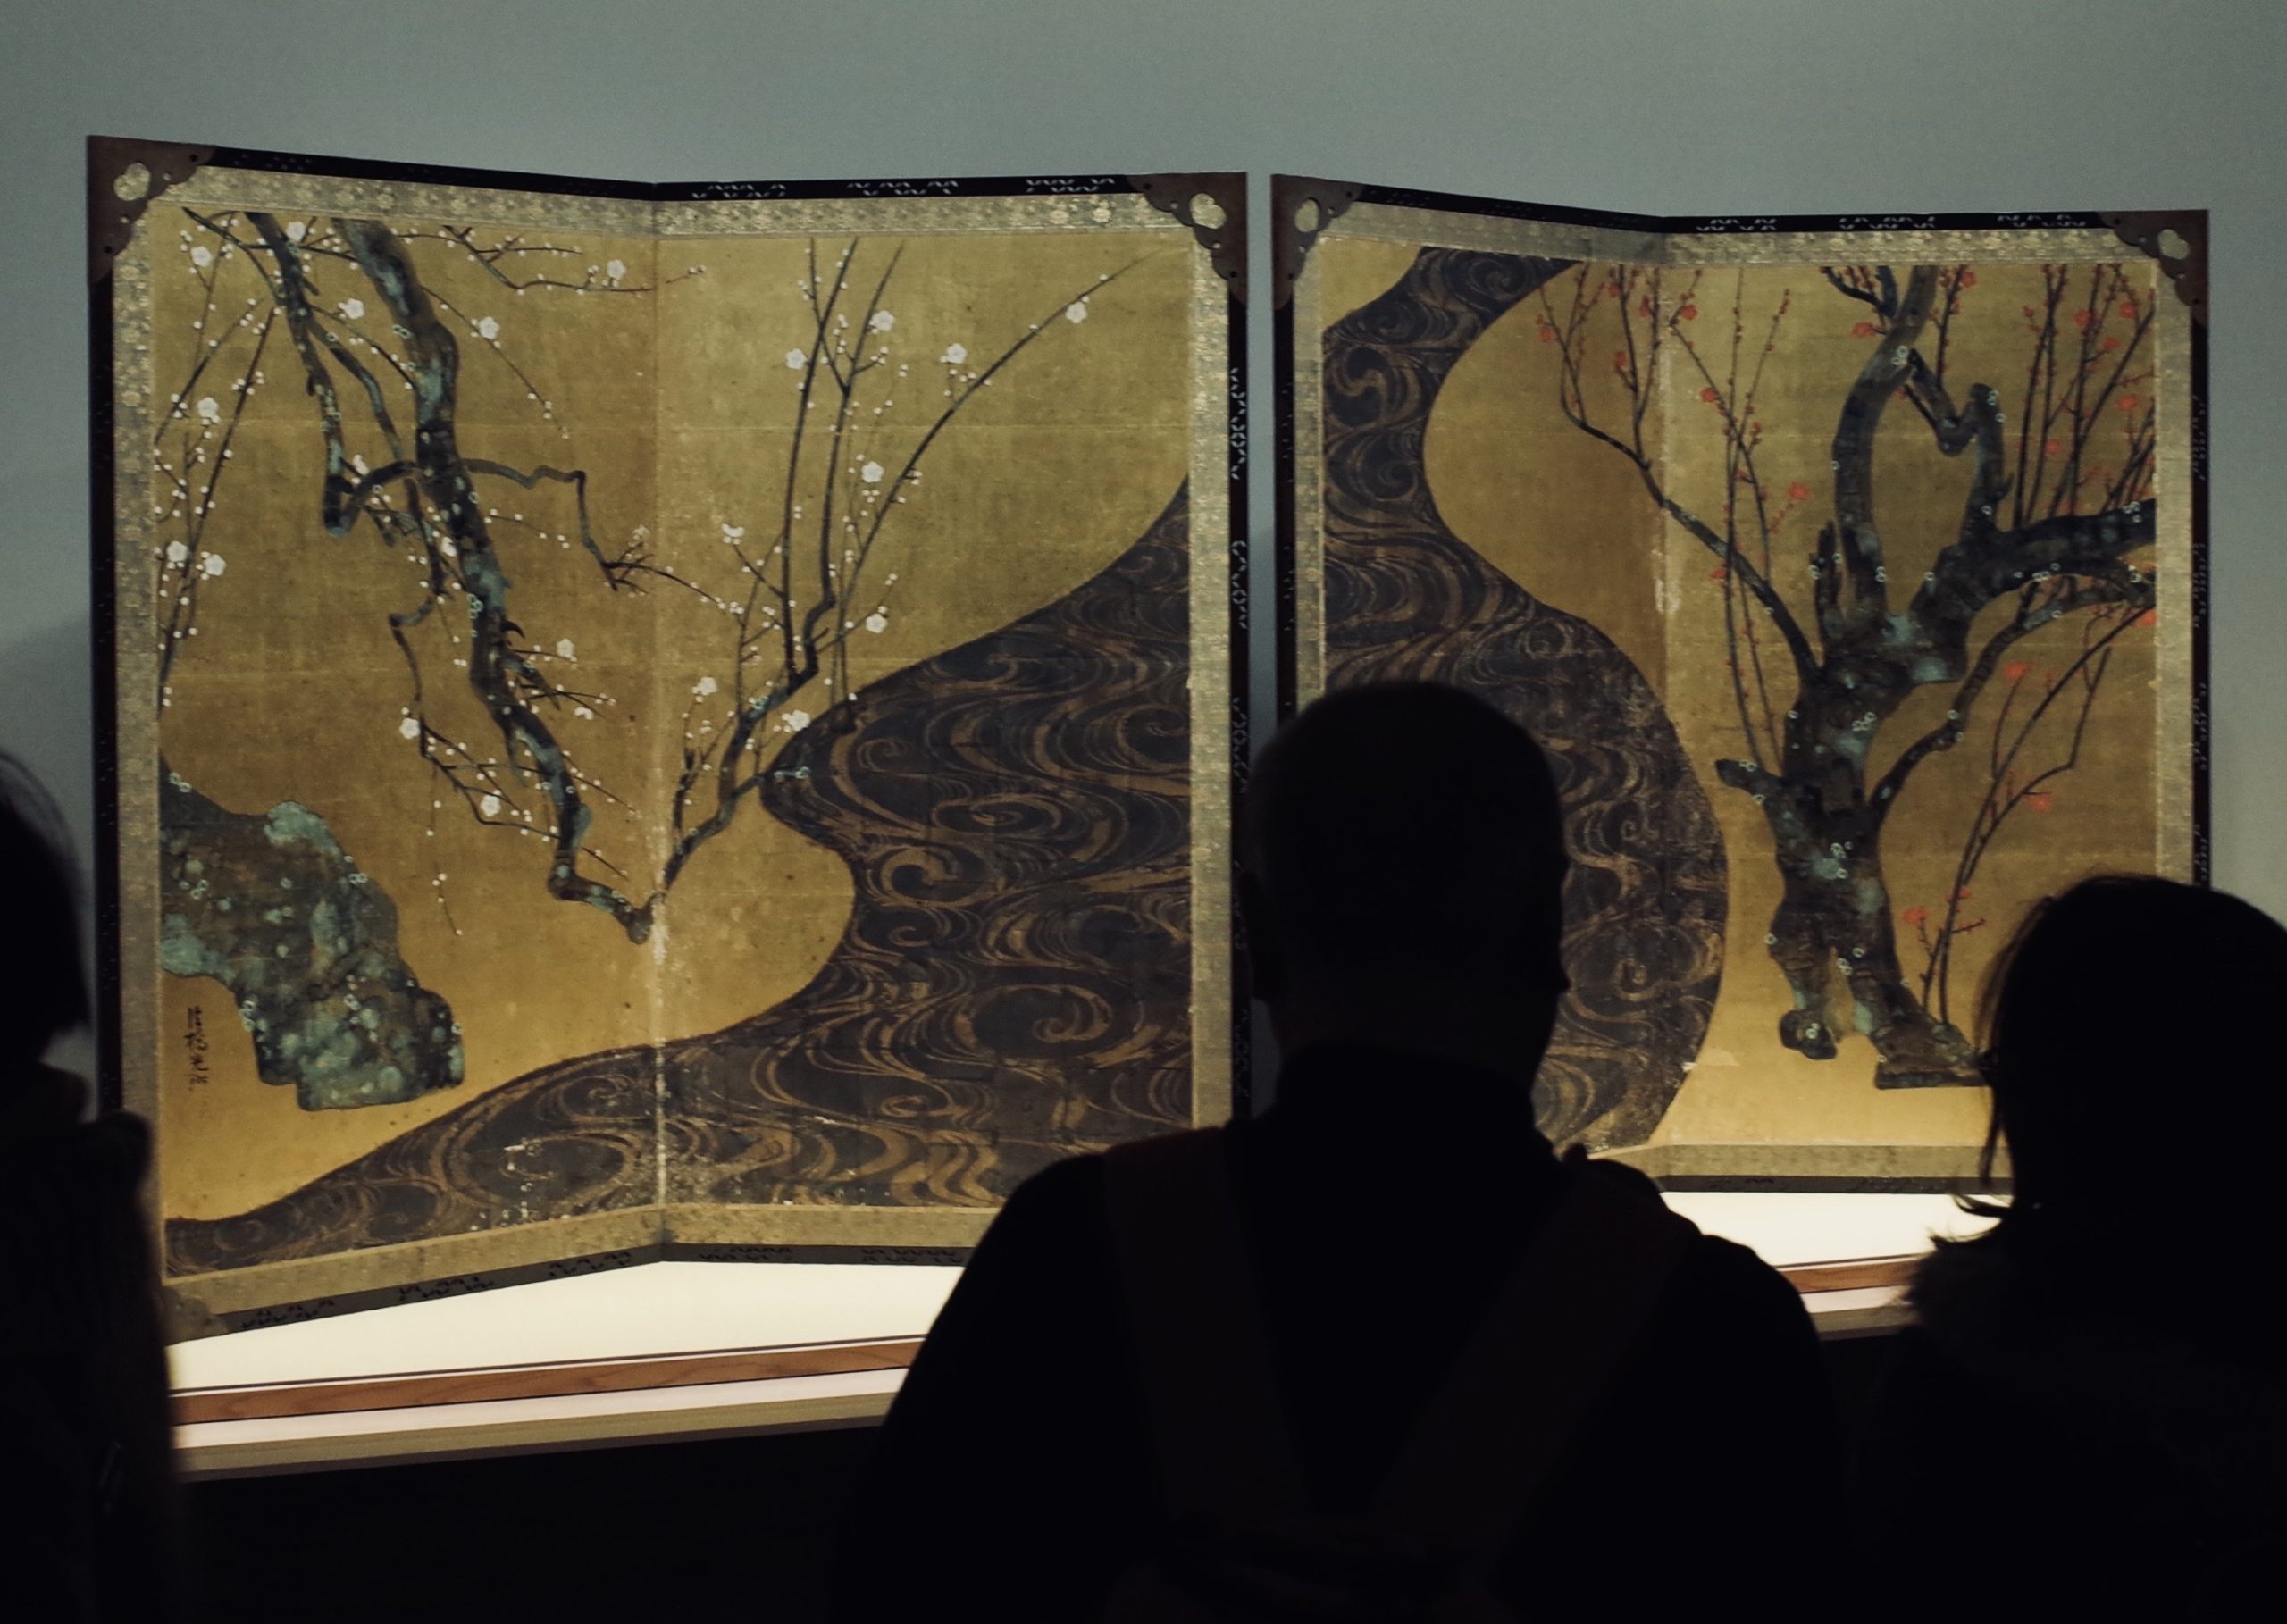 Ogata Kōrin, Red and White Plum Blossoms, Edo period, 18th century, pair of two-fold screens, color and gold leaf on paper, 156 x 172.2 cm each, National Treasure (MOA Museum, Atami, Japan; photo: mxmstryo, CC BY 2.0)